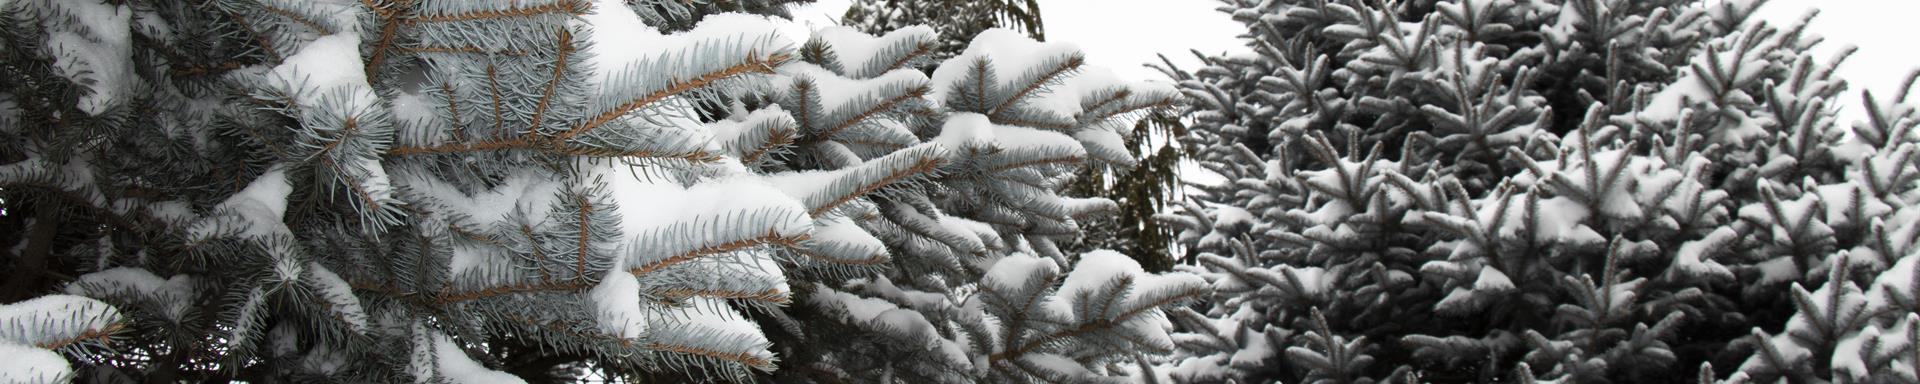 Image of evergreens covered in snow on the Mud Creek Trail